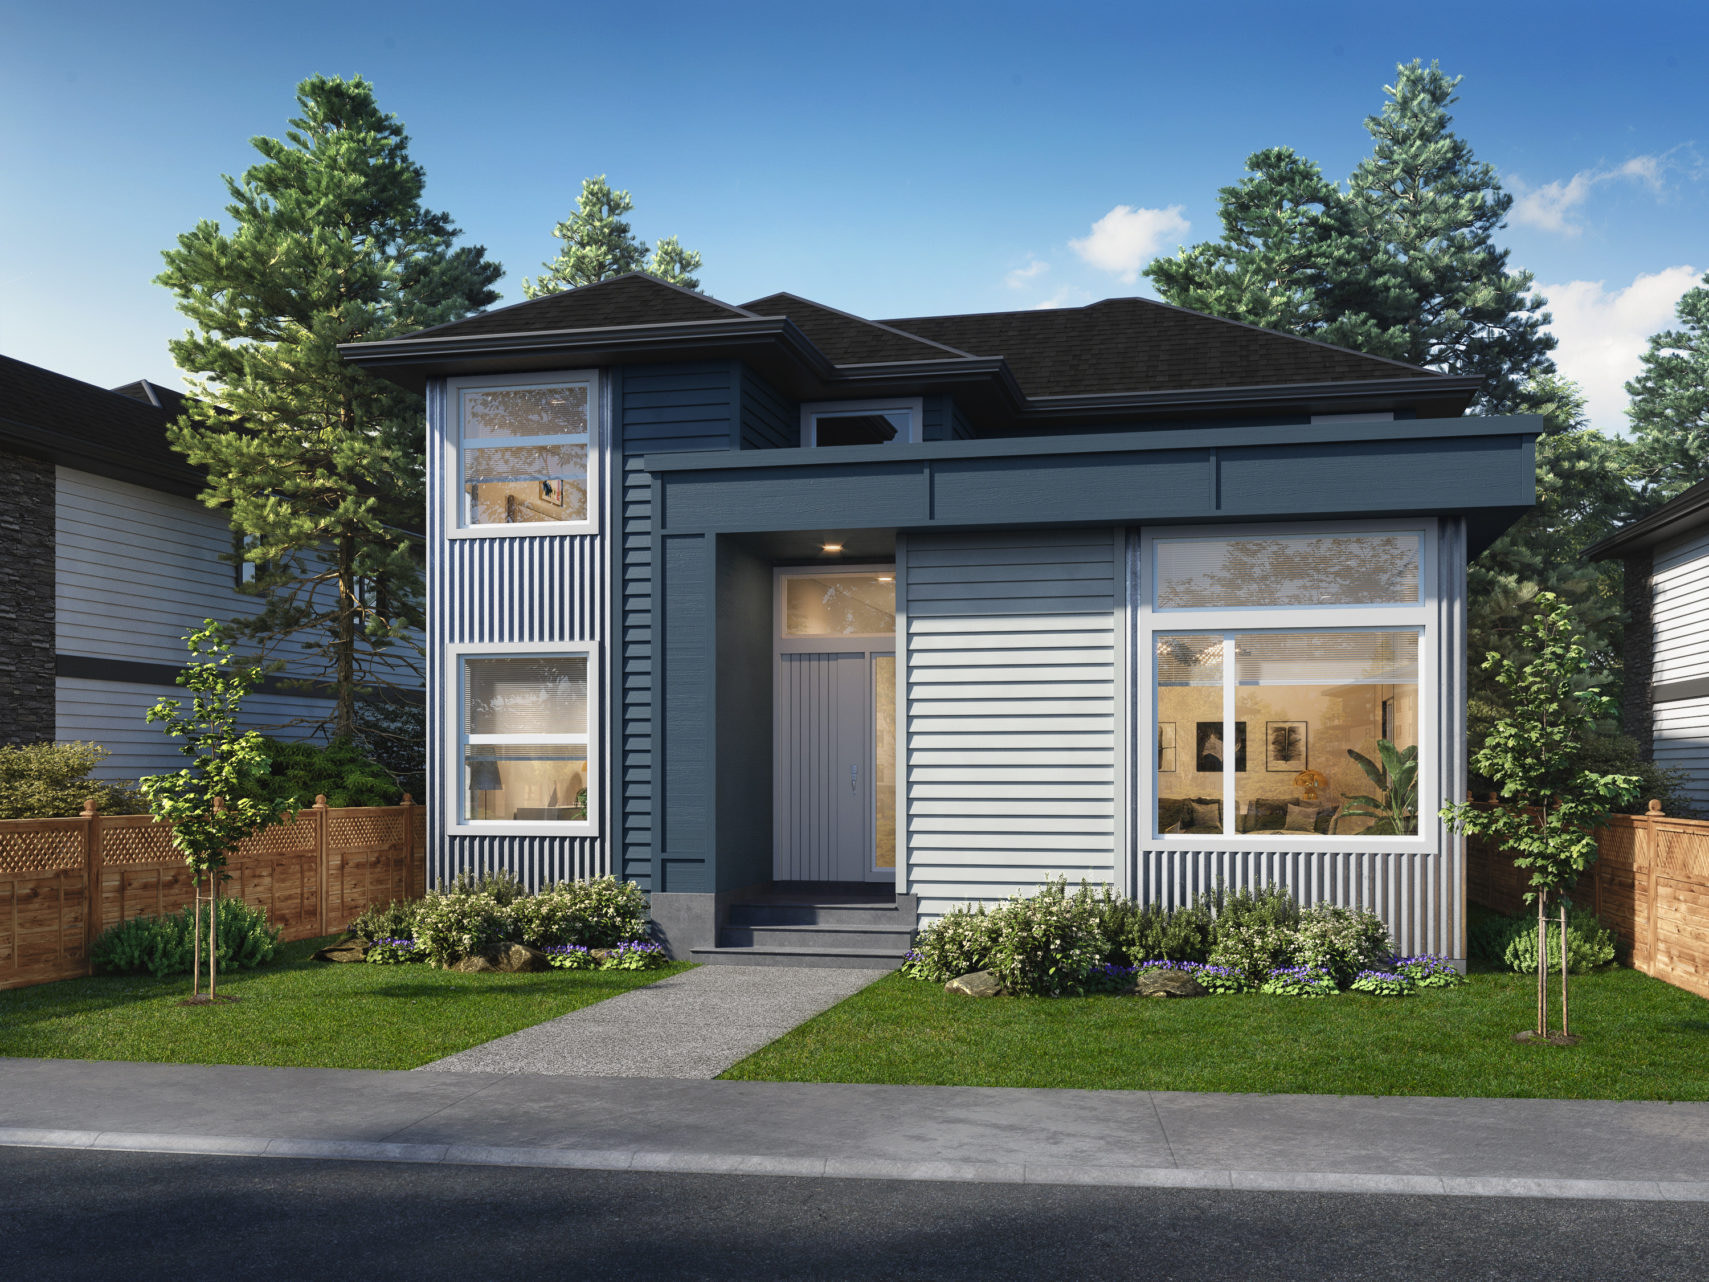 Lot 19 carriage home with 3 bedrooms, 2.5 bathrooms + den.